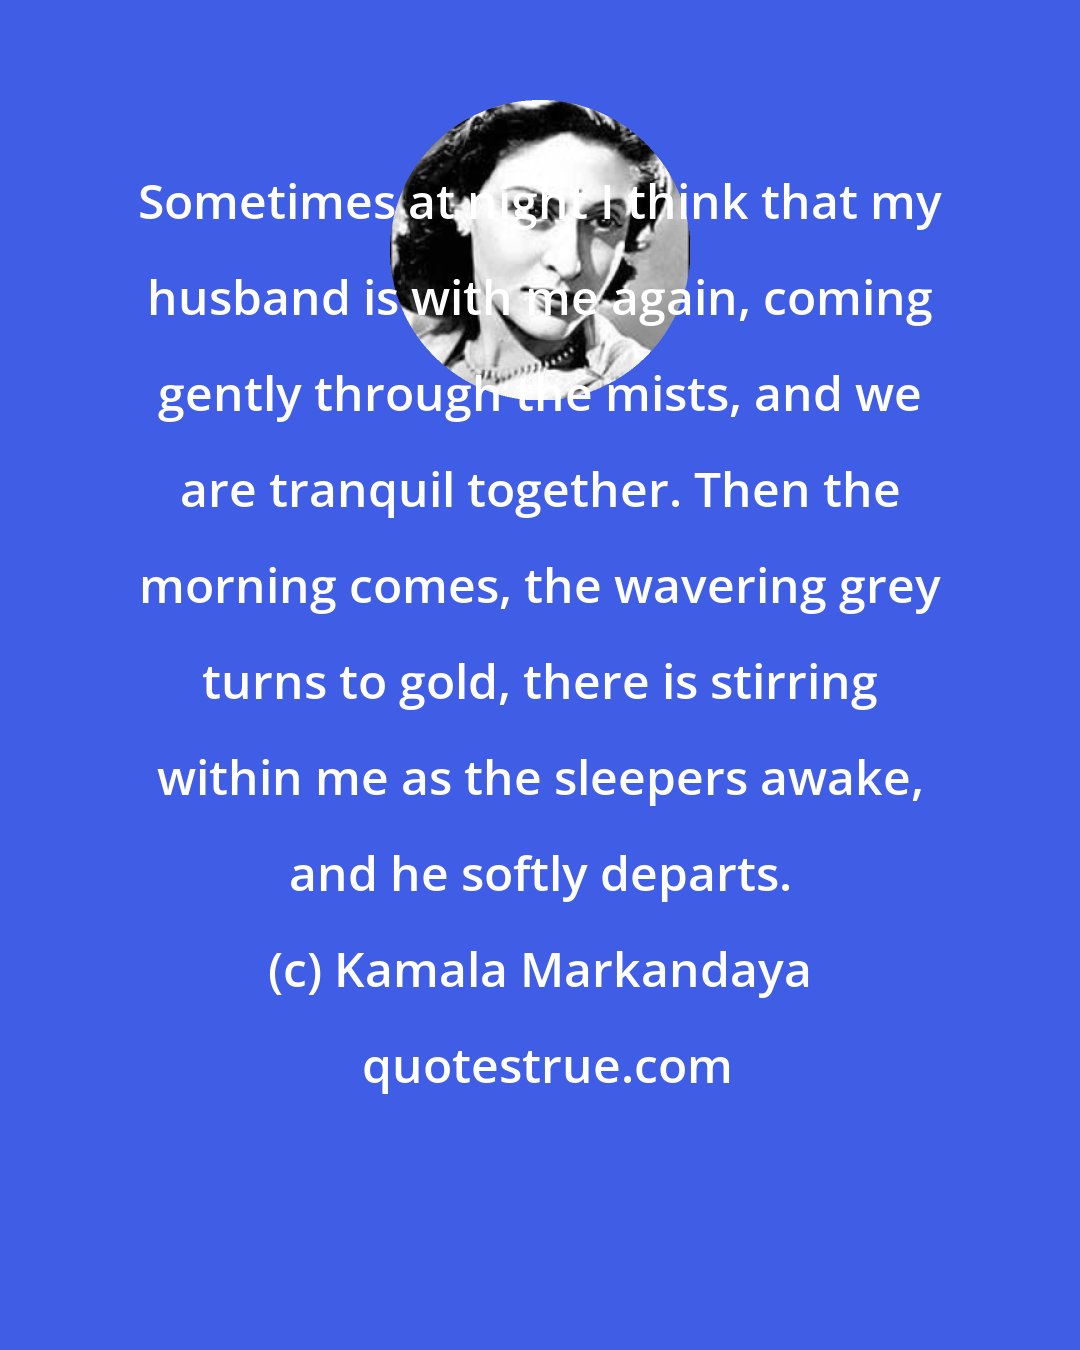 Kamala Markandaya: Sometimes at night I think that my husband is with me again, coming gently through the mists, and we are tranquil together. Then the morning comes, the wavering grey turns to gold, there is stirring within me as the sleepers awake, and he softly departs.